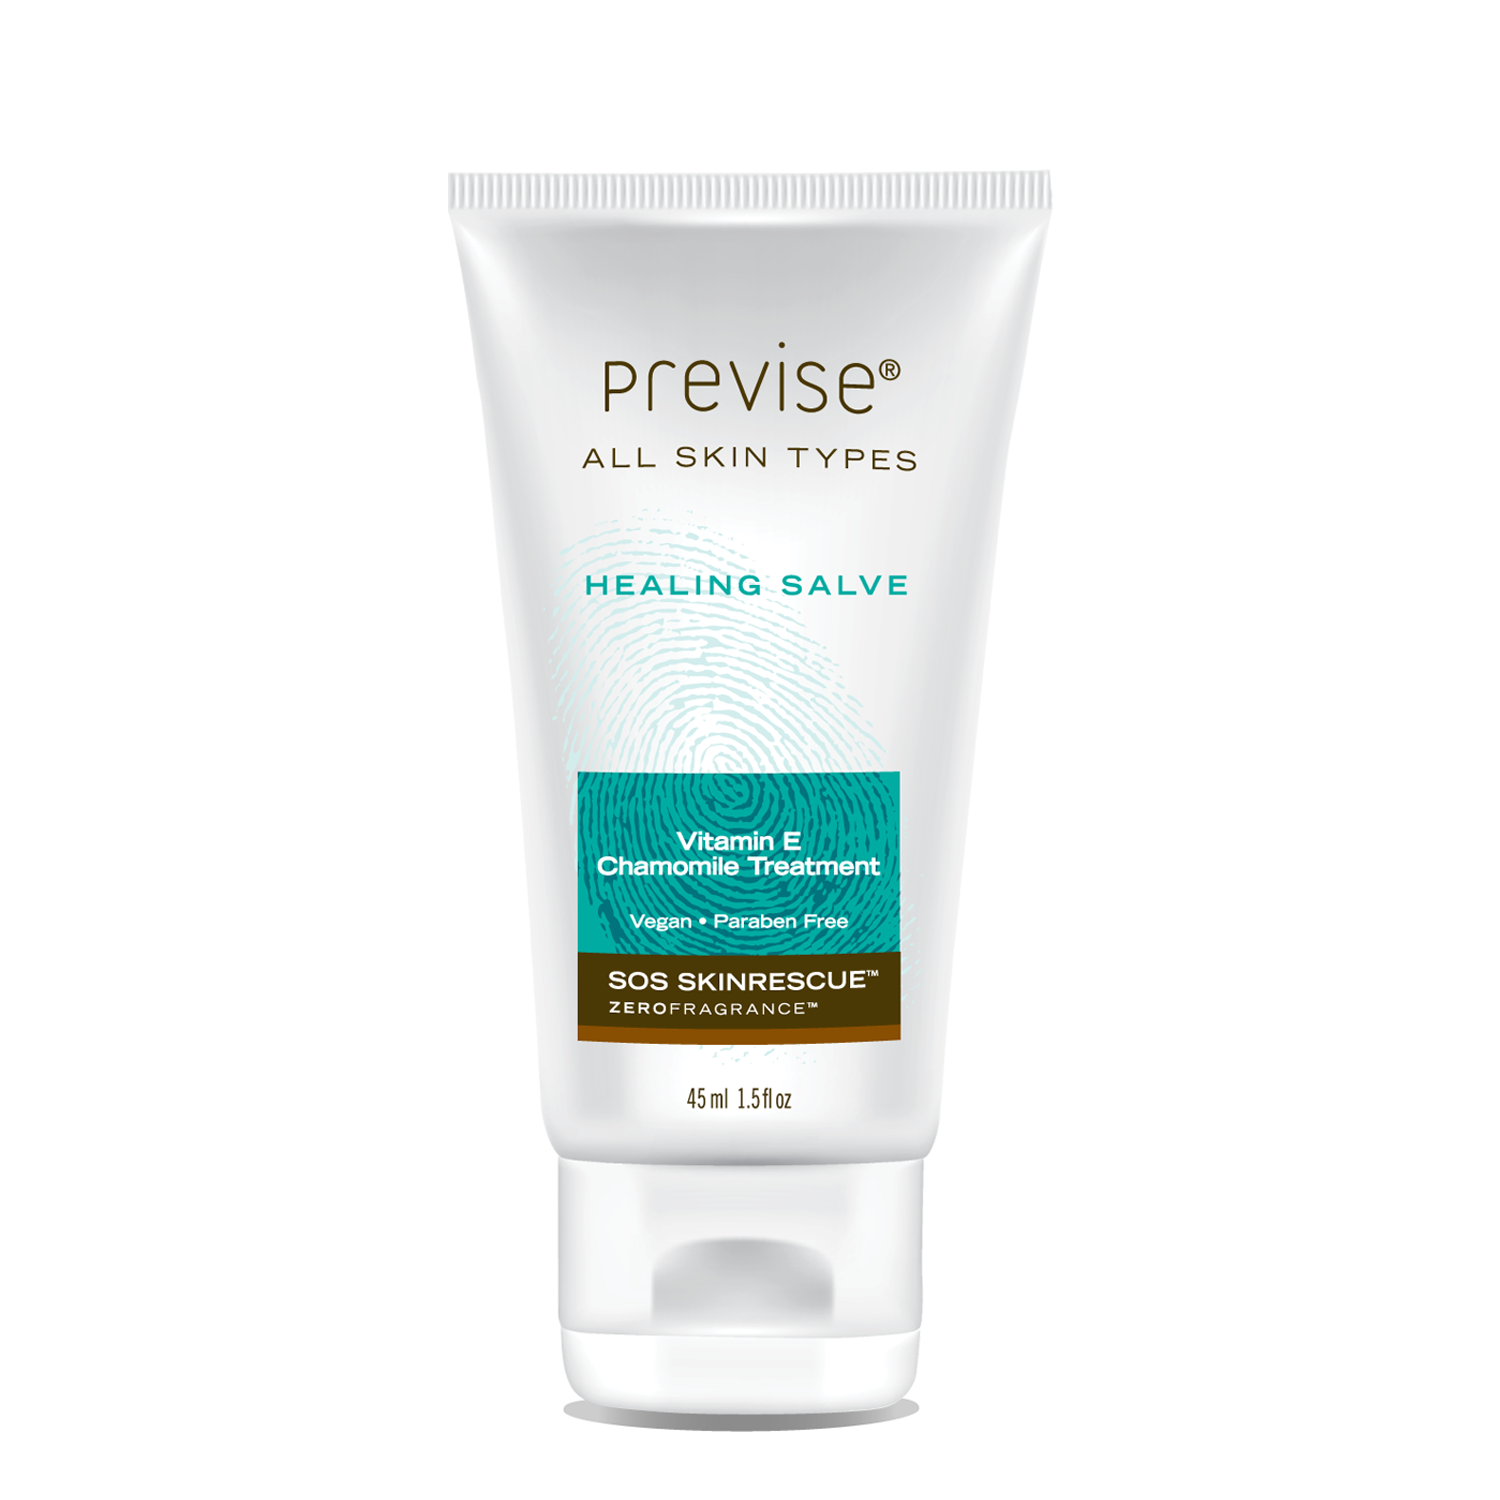 Previse Is Good to Reduce the Stretch Marks On Your Body